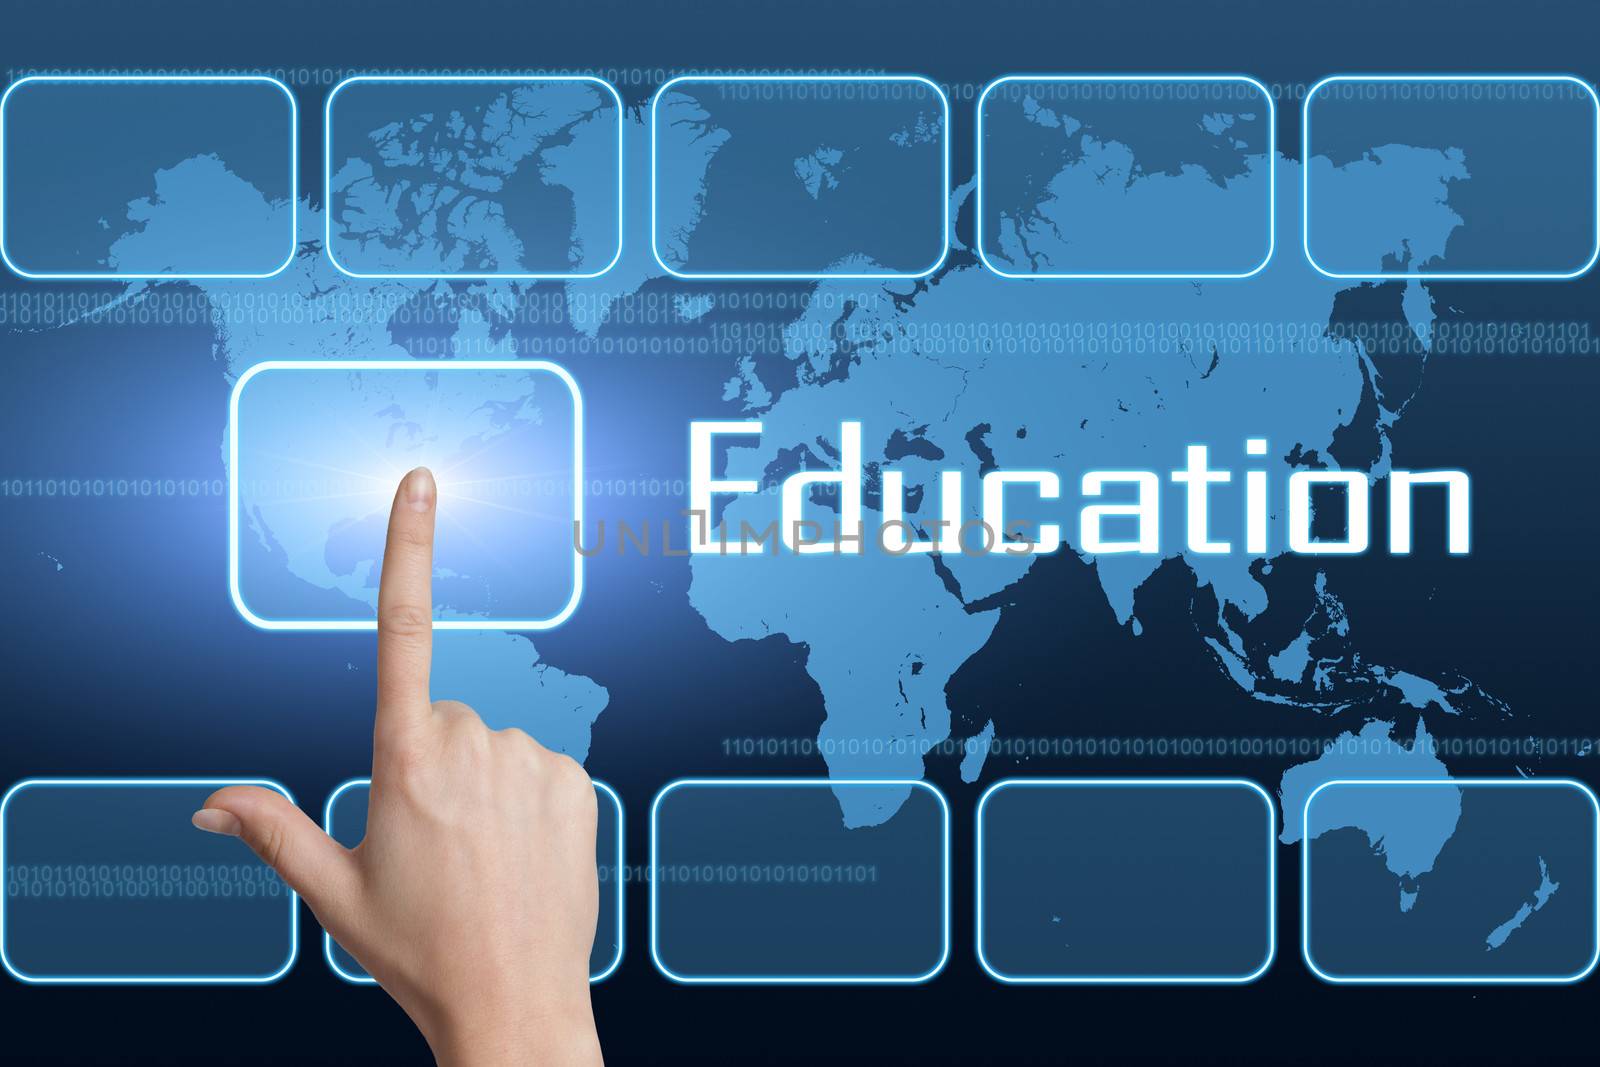 Education concept with interface and world map on blue background